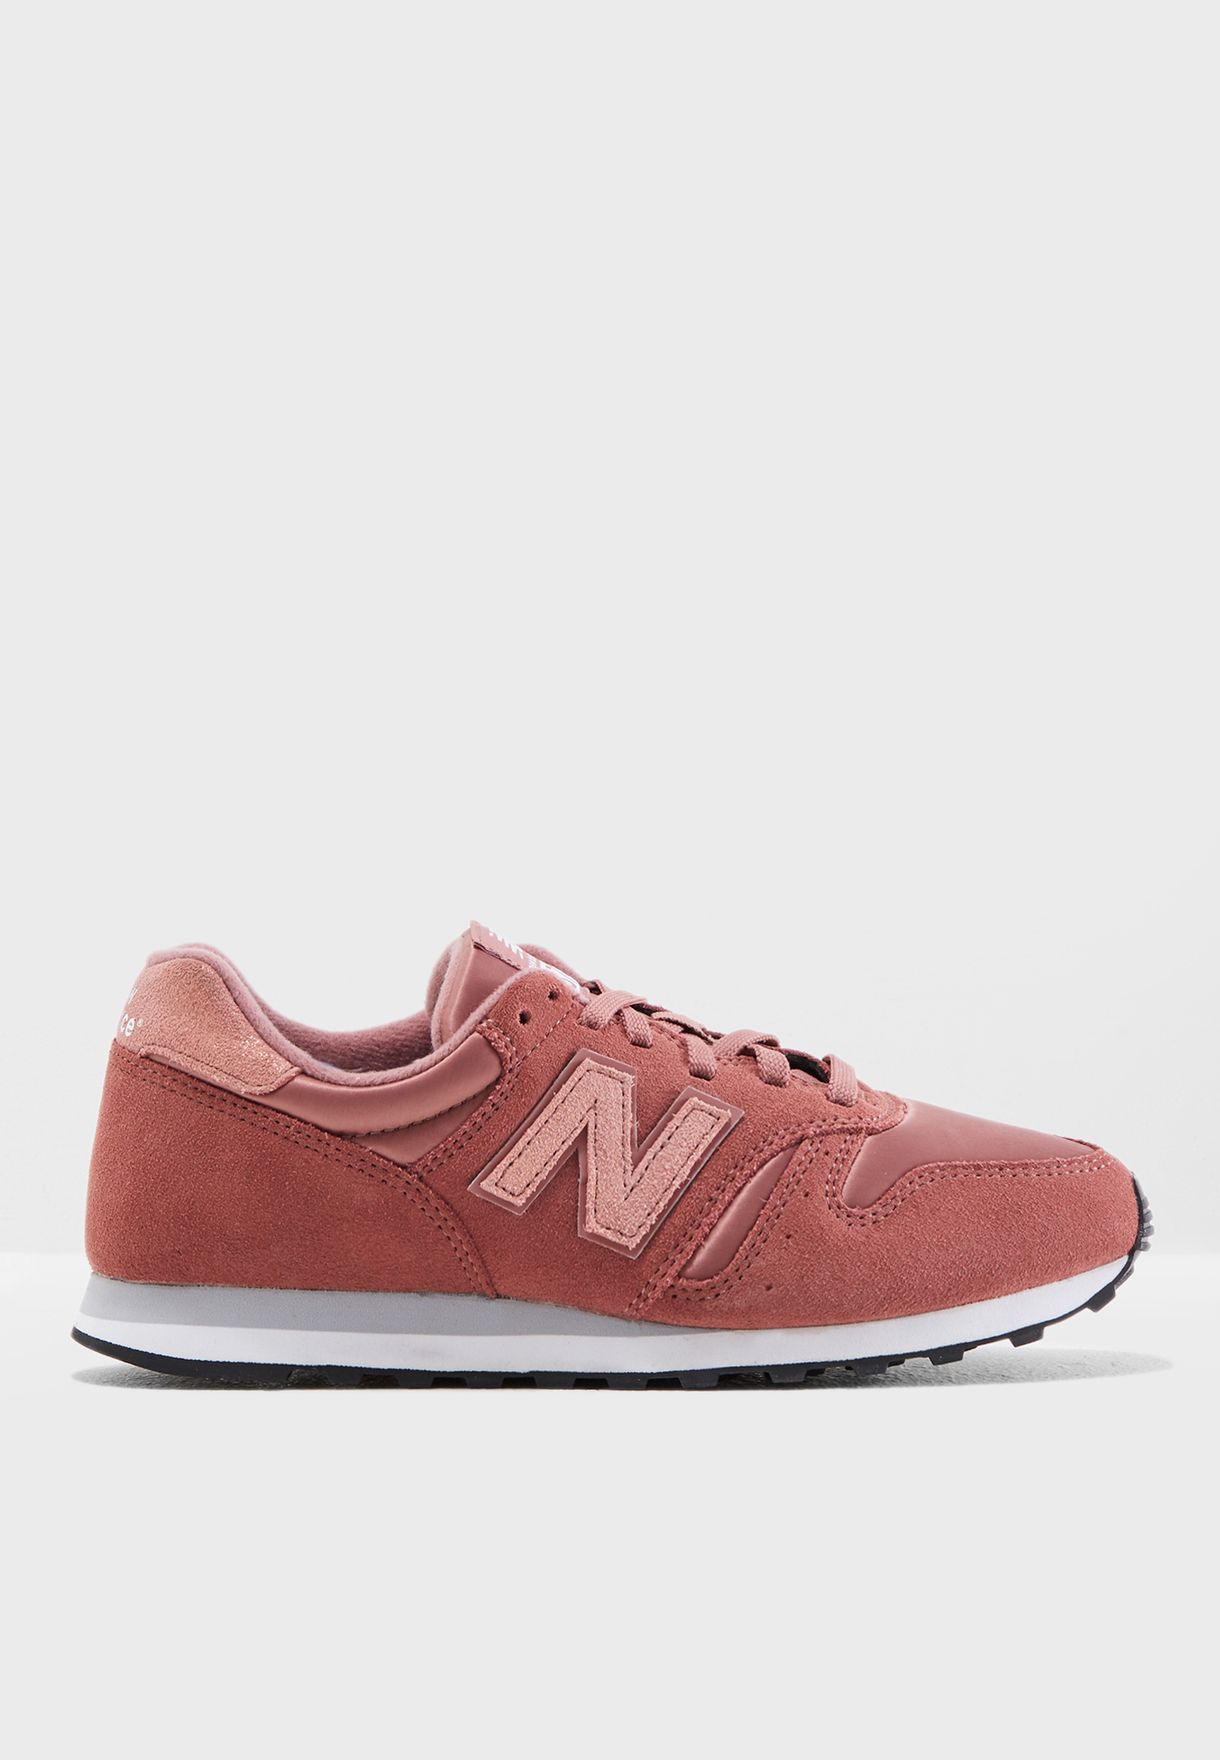 new balance pink 373 v1 suede trainers